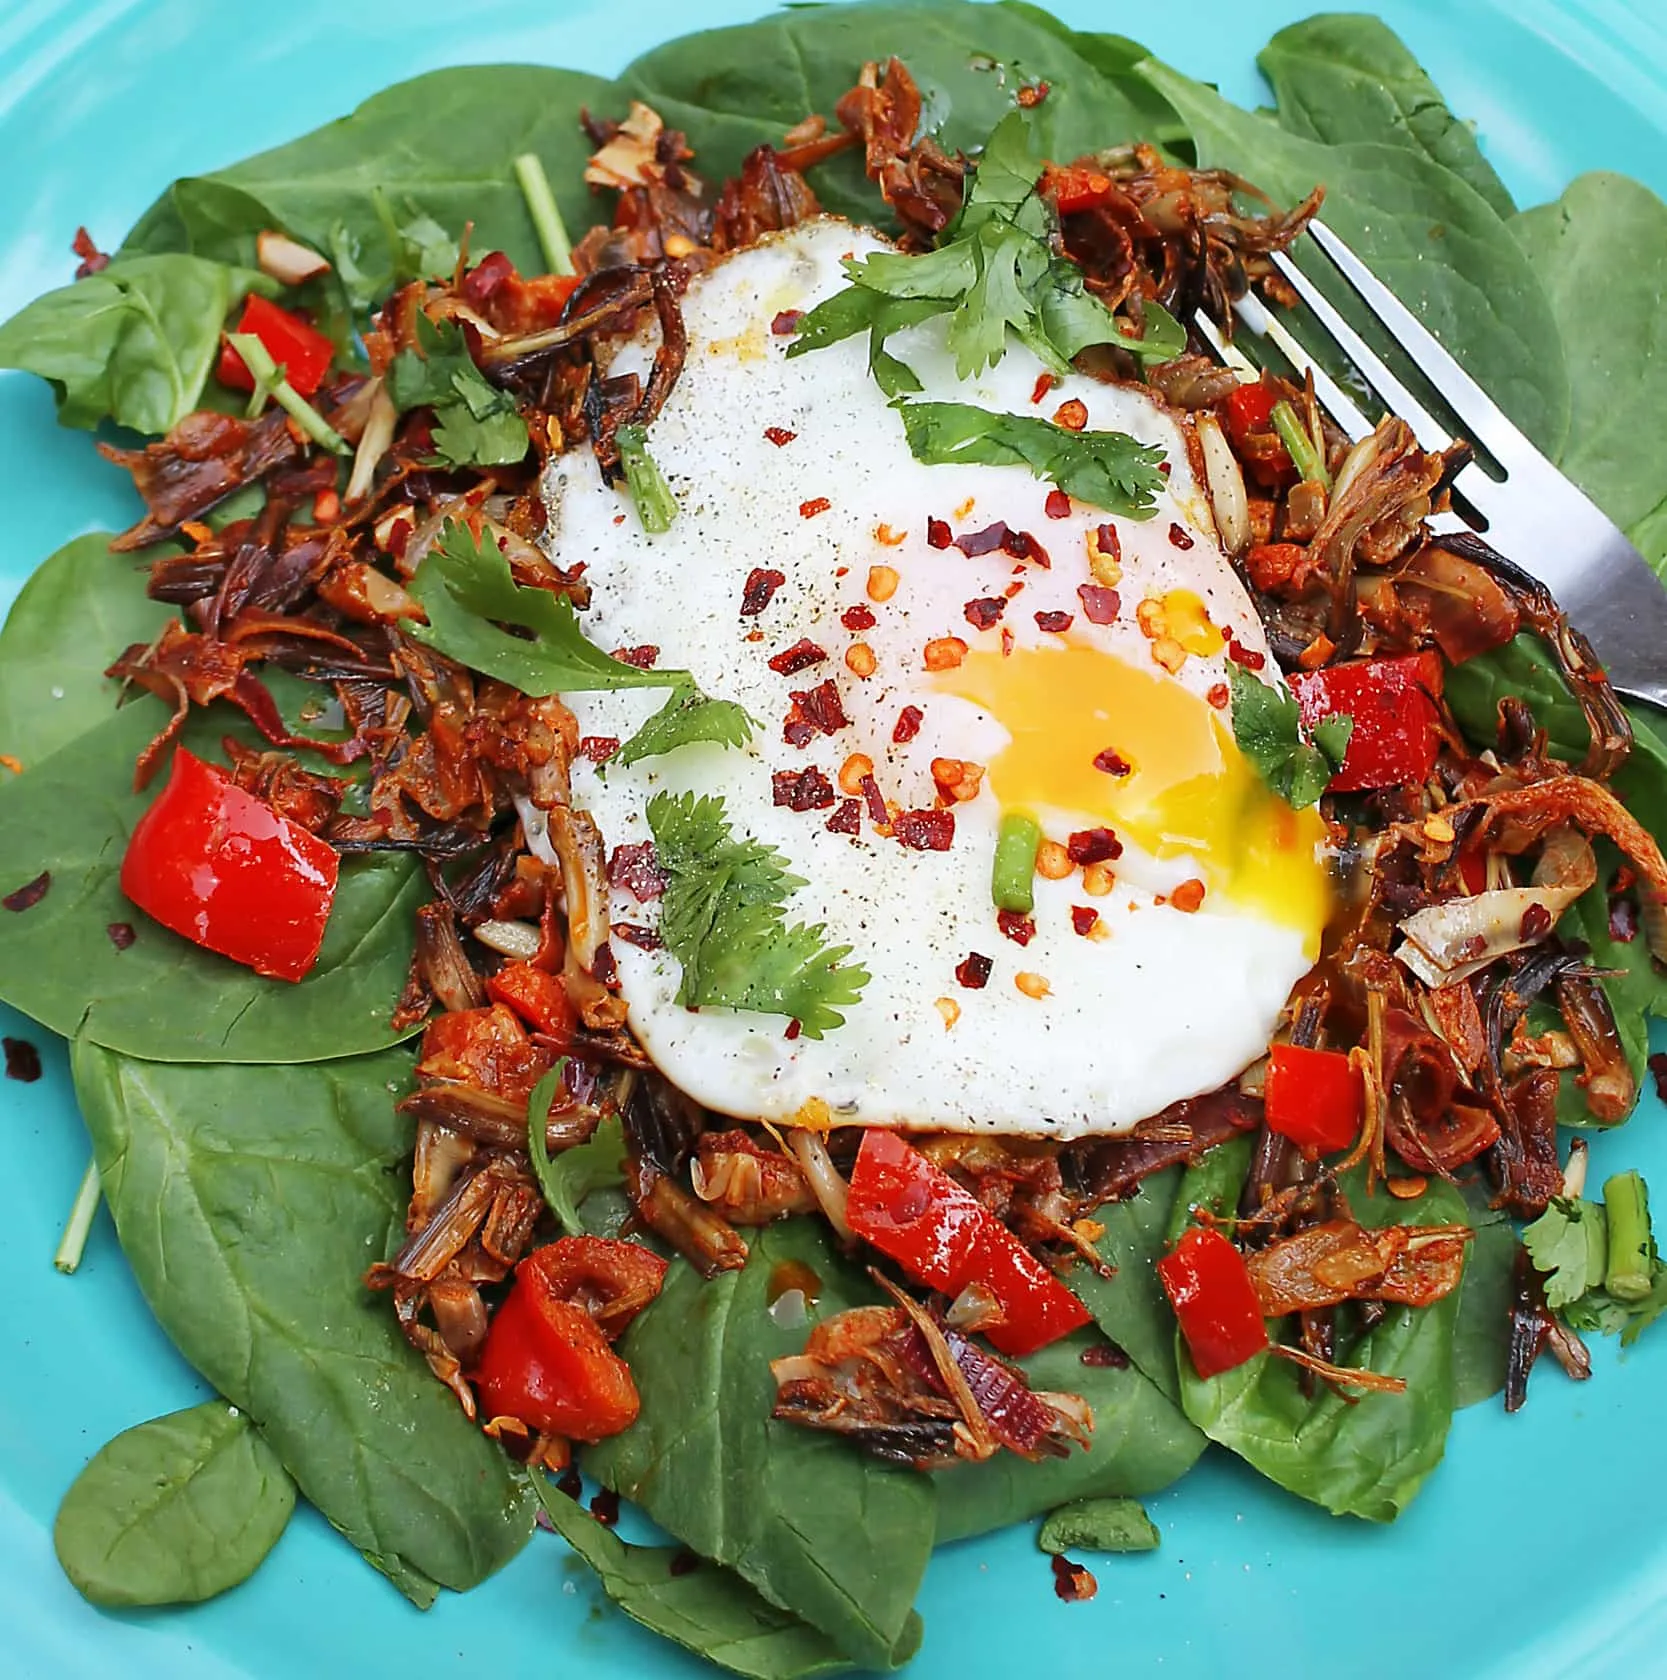 BANANA FLOWER STIR FRY with egg and spinach